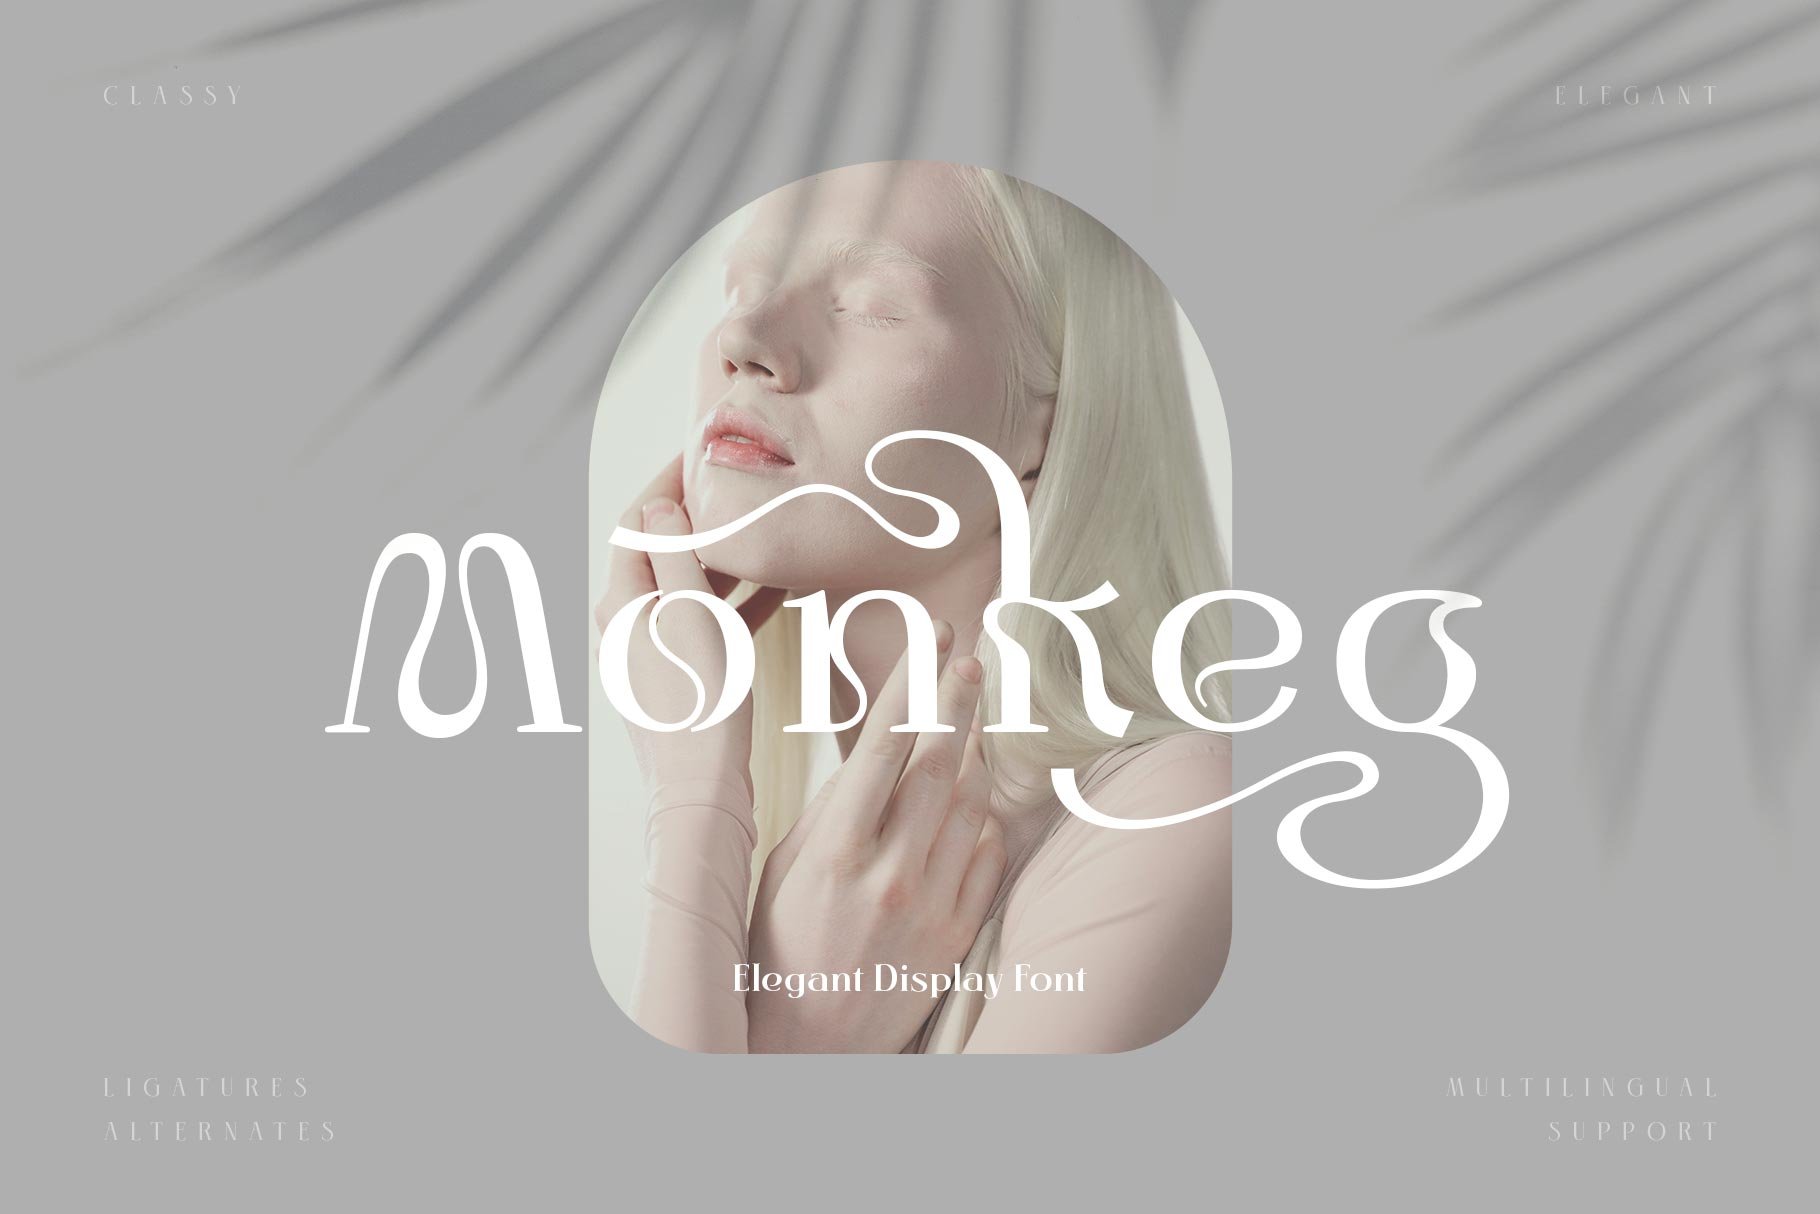 Mongkeg Typeface cover image.